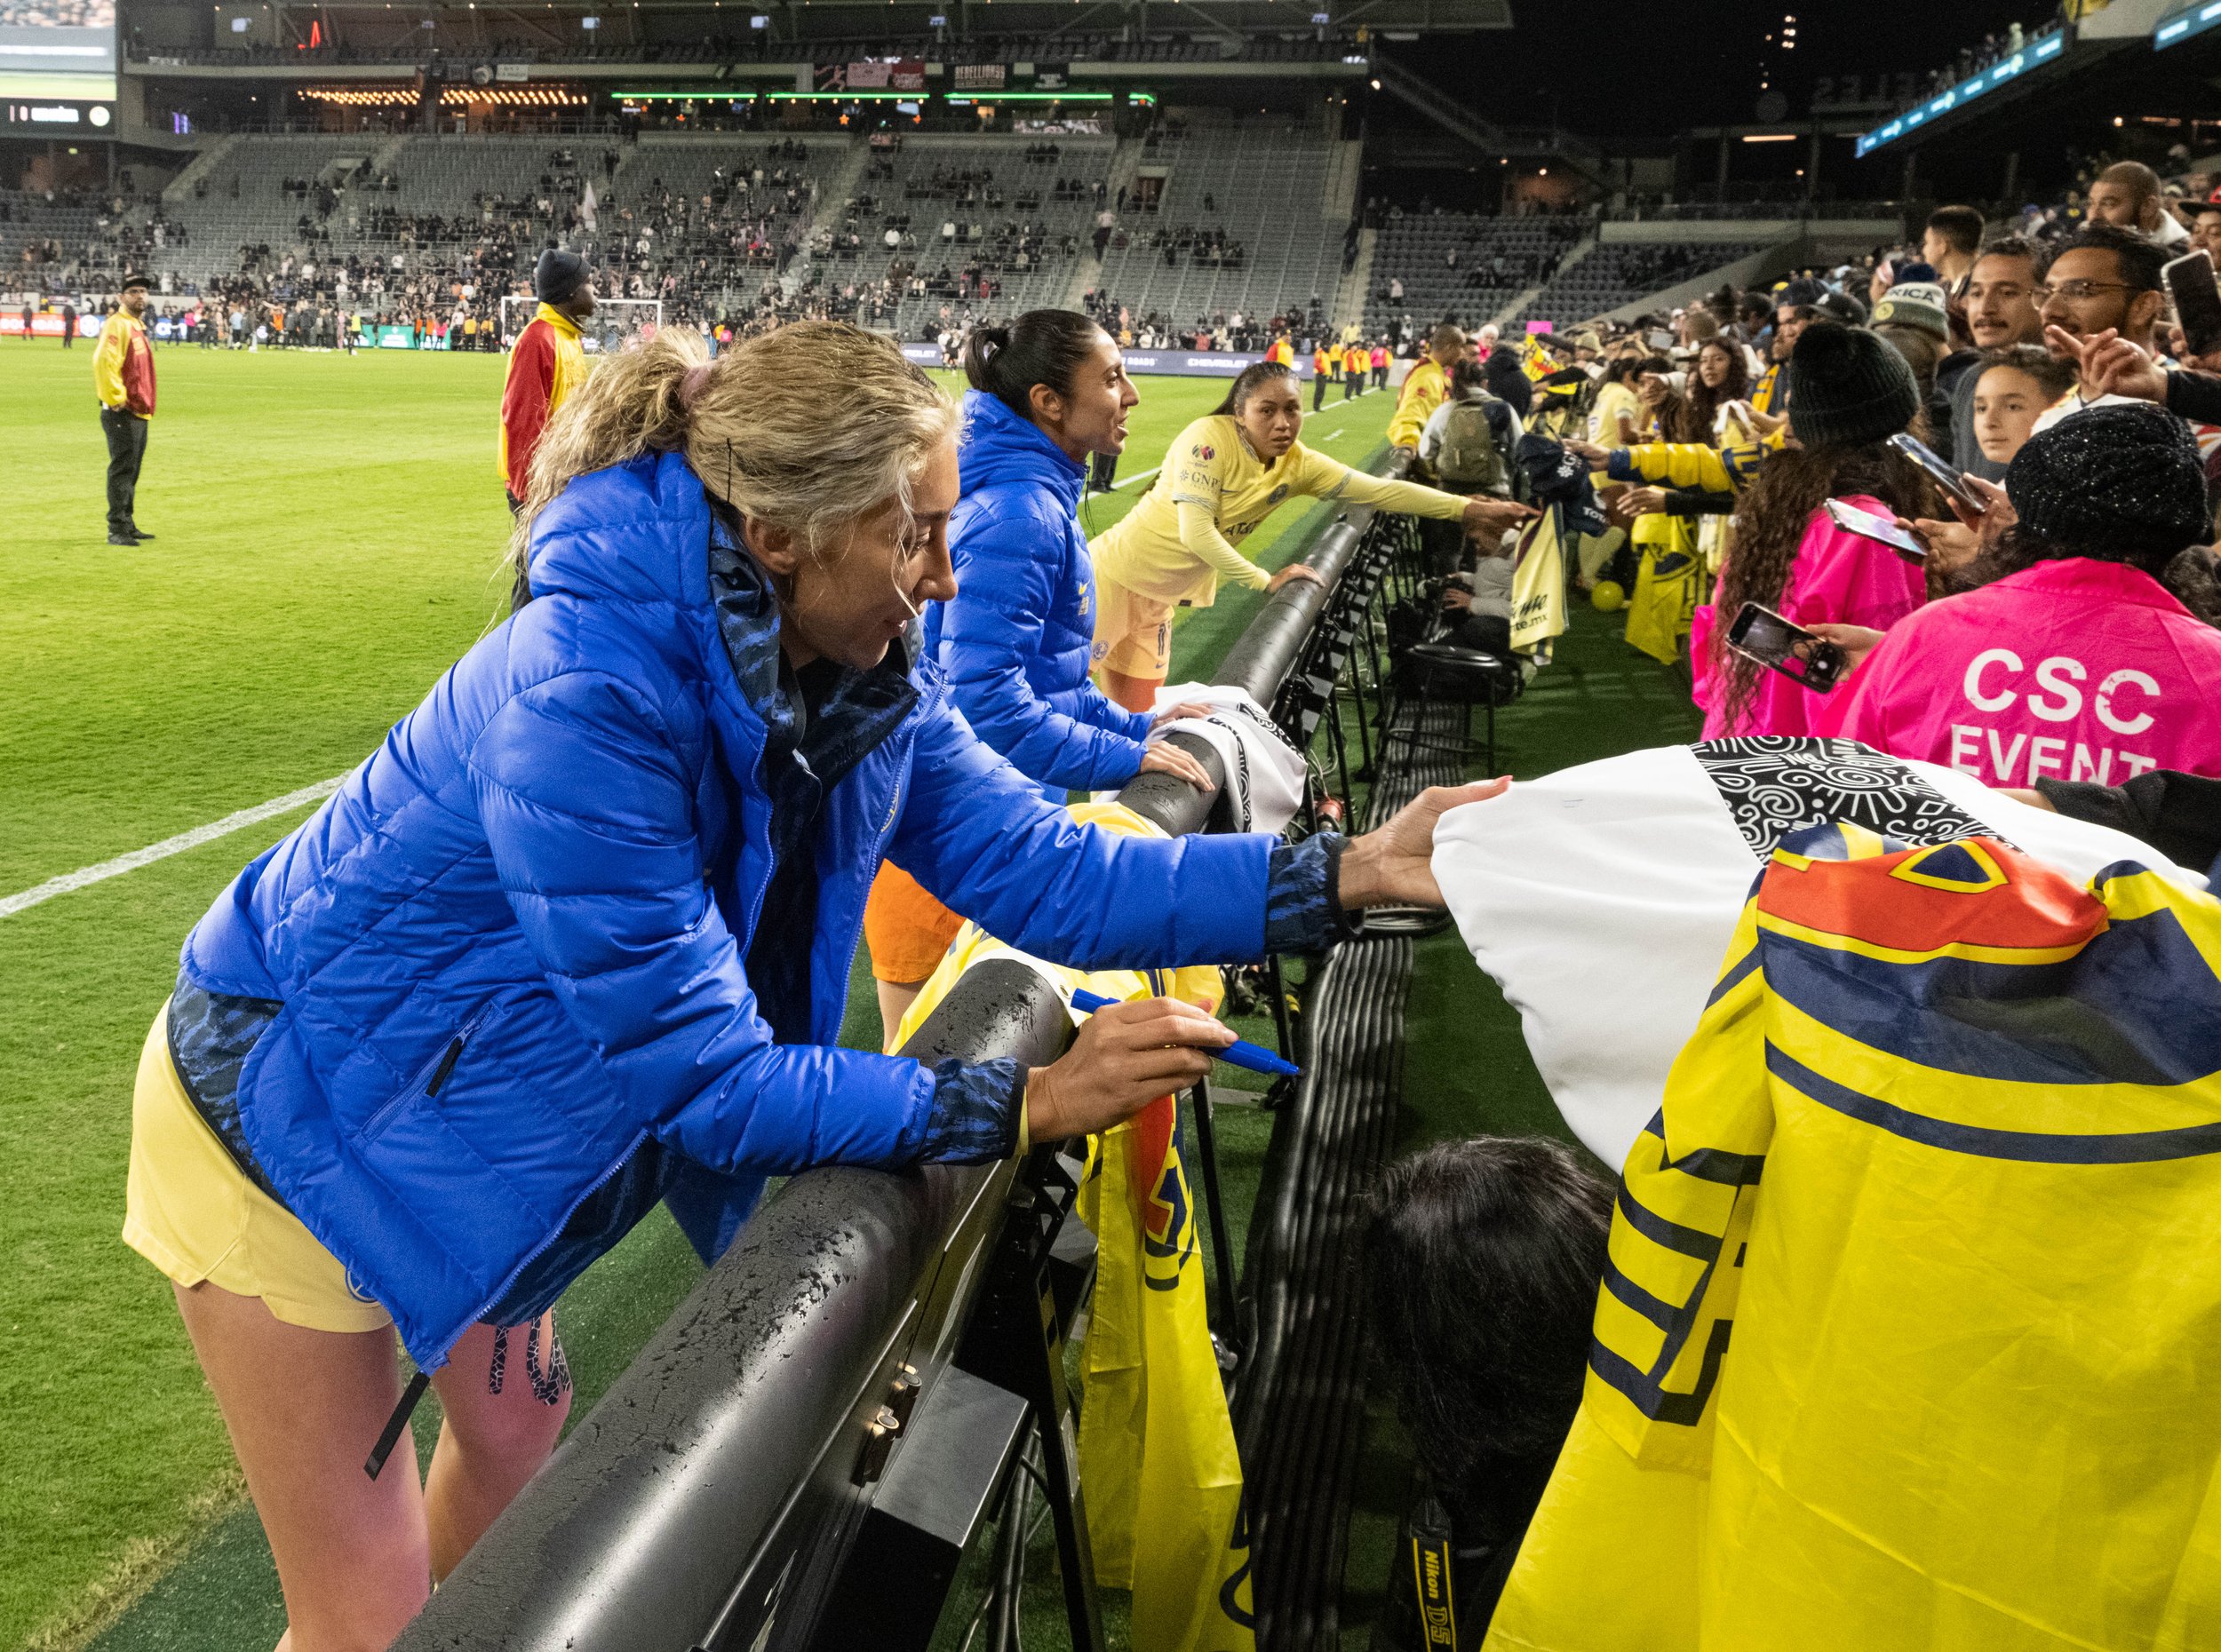  Club America Femenil fans passing items to Jocelyn Orejel(F) , Itzel Gonzales(M) and Montserrat Hernandez(B) for autographs at the end of the international friendly against Angel City Fc on Wed. March 8, 2023 at BMO Stadium in Los Angeles, Calif. (D